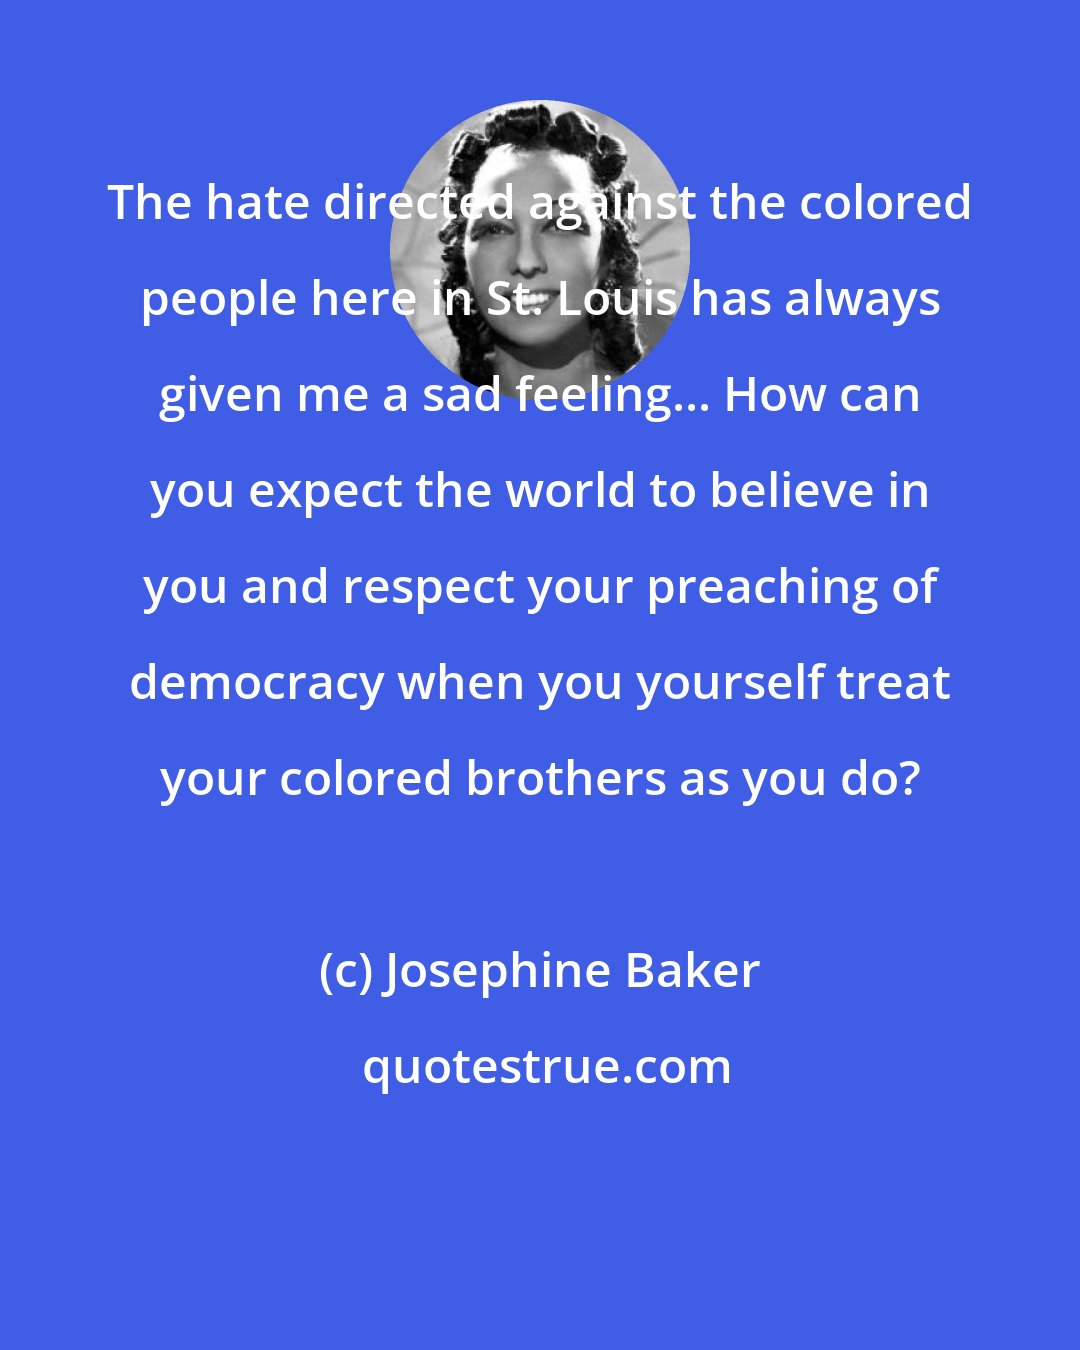 Josephine Baker: The hate directed against the colored people here in St. Louis has always given me a sad feeling... How can you expect the world to believe in you and respect your preaching of democracy when you yourself treat your colored brothers as you do?